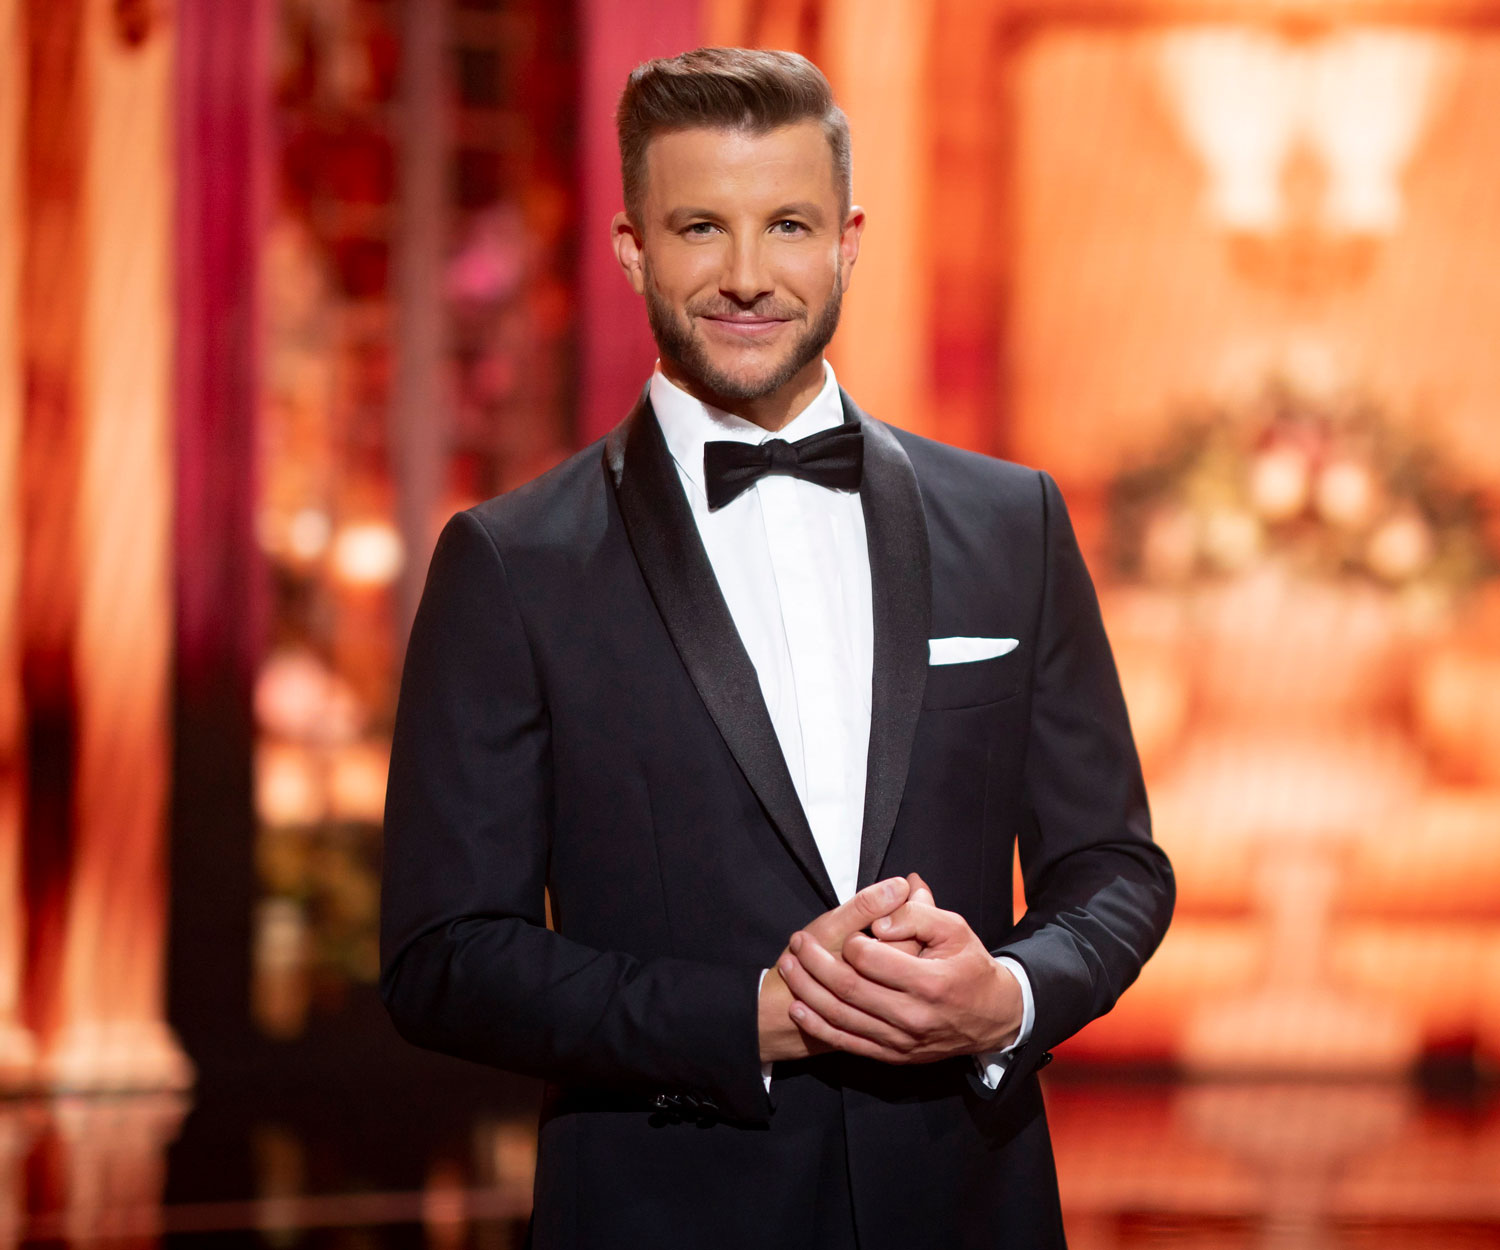 Luke Jacobz takes us inside the newest dating show The Proposal